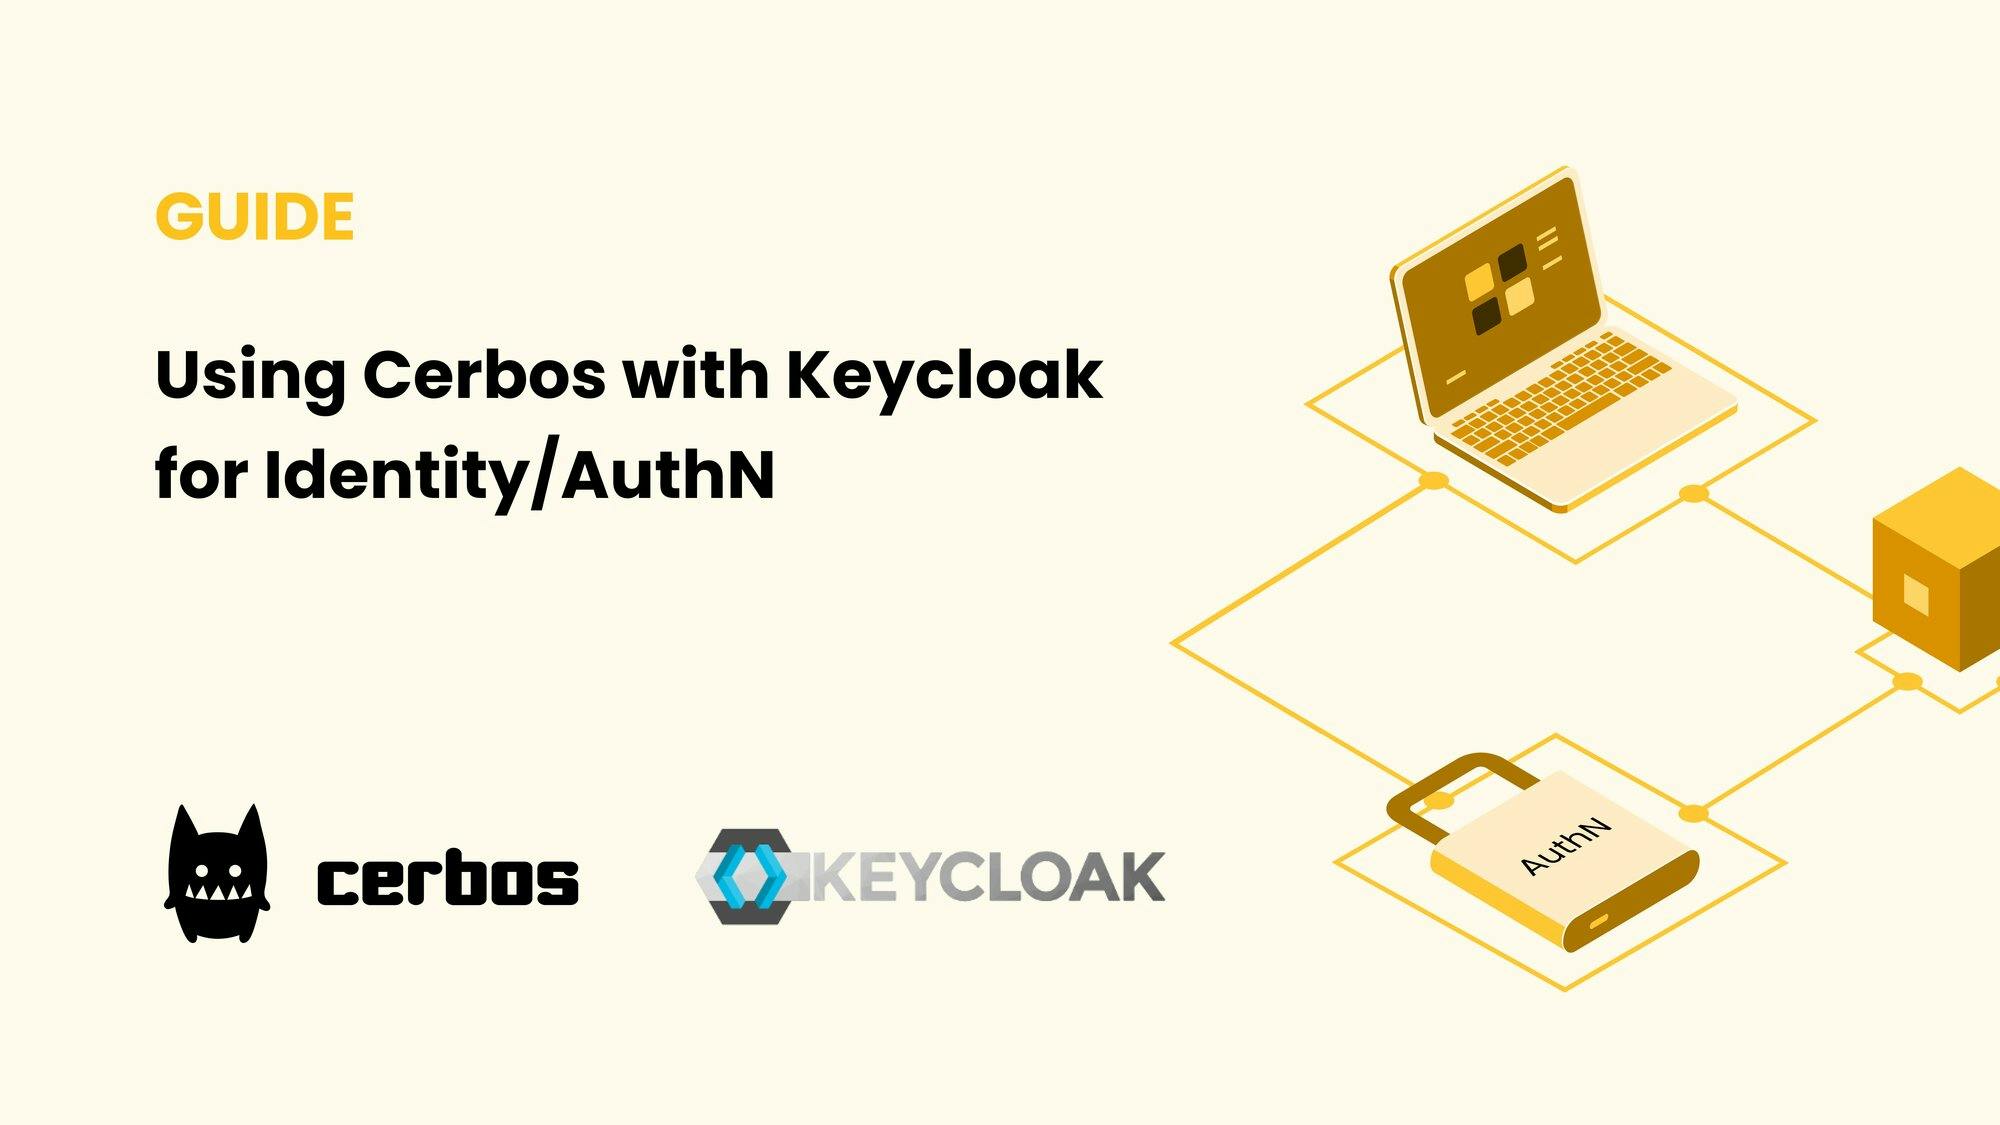 Using Cerbos with Keycloak for Identity/AuthN